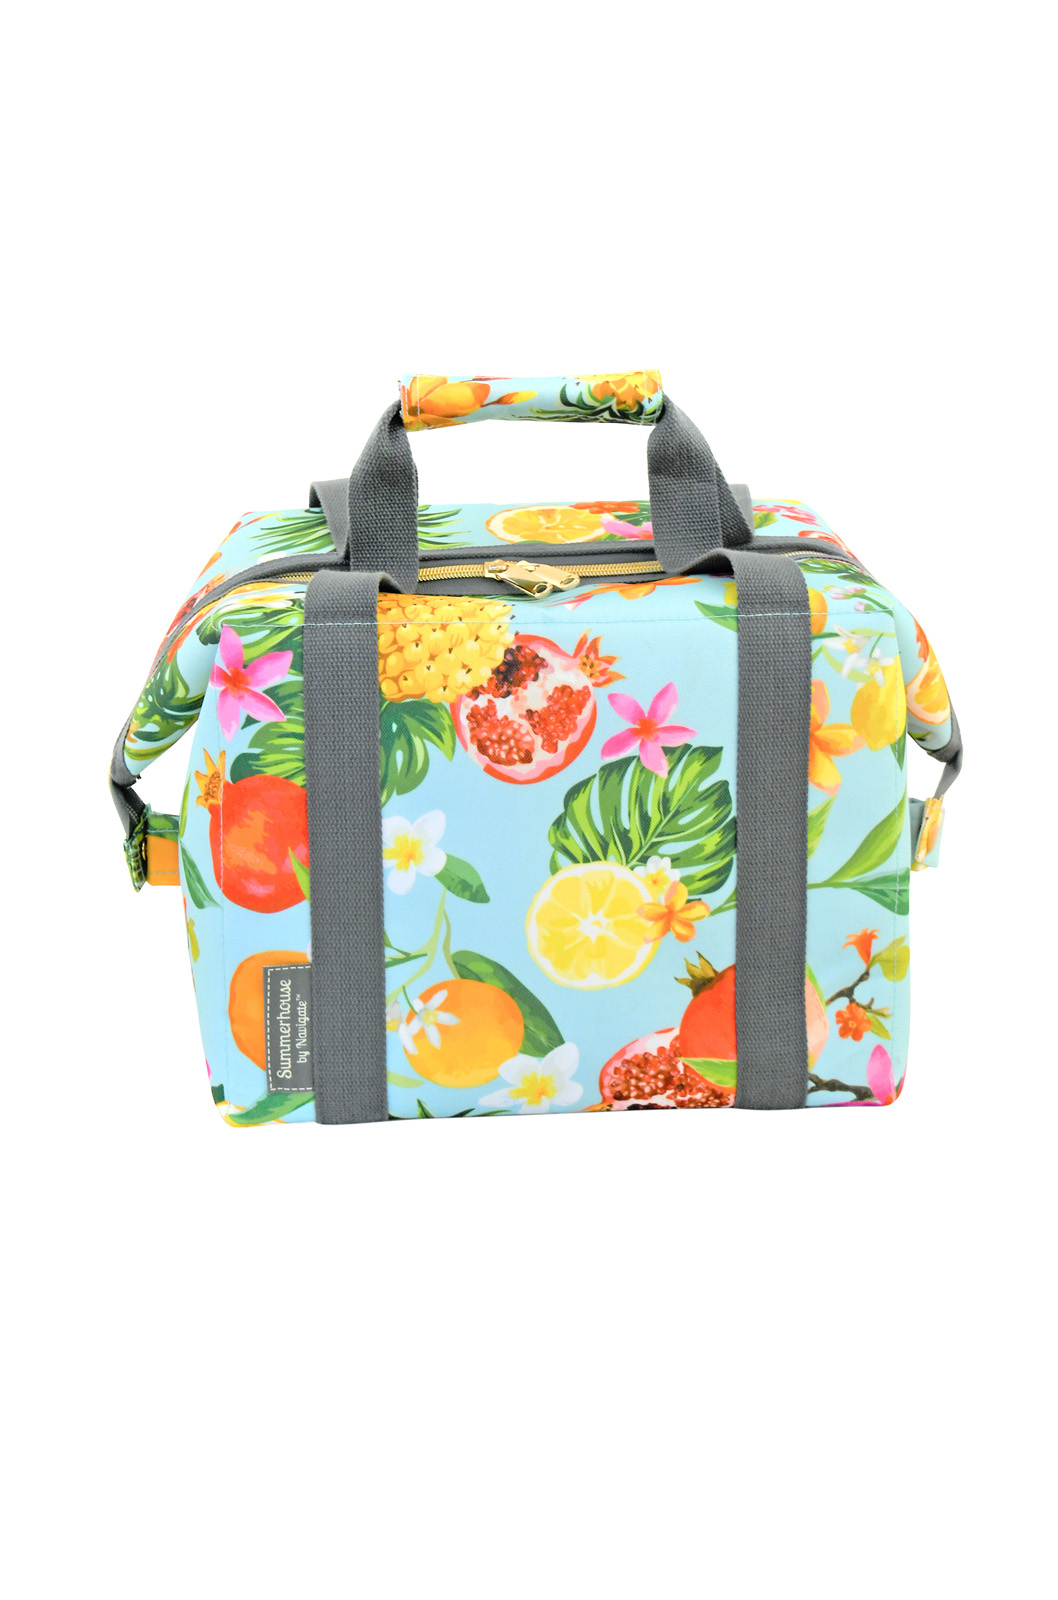 Convertible cool insulated cooler lunch picnic bag